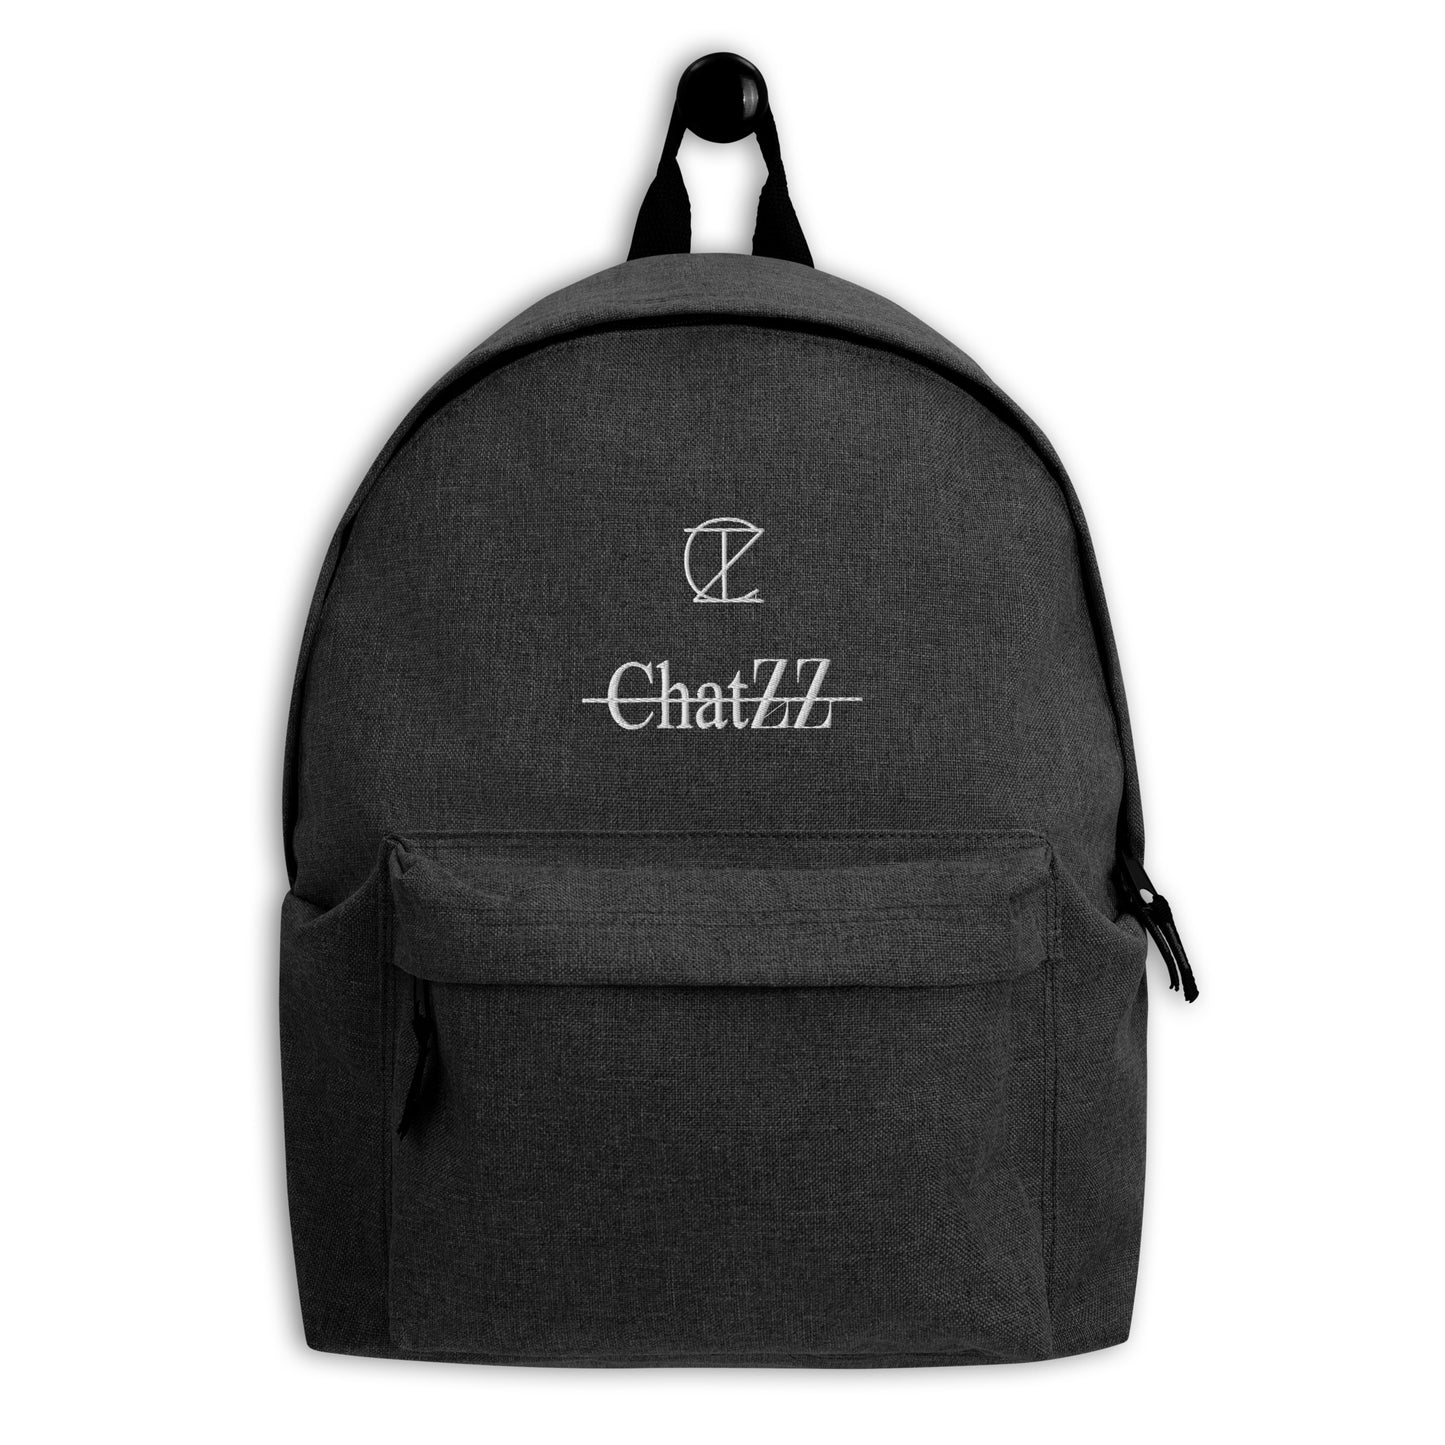 ChatZZ Embroidered Backpack